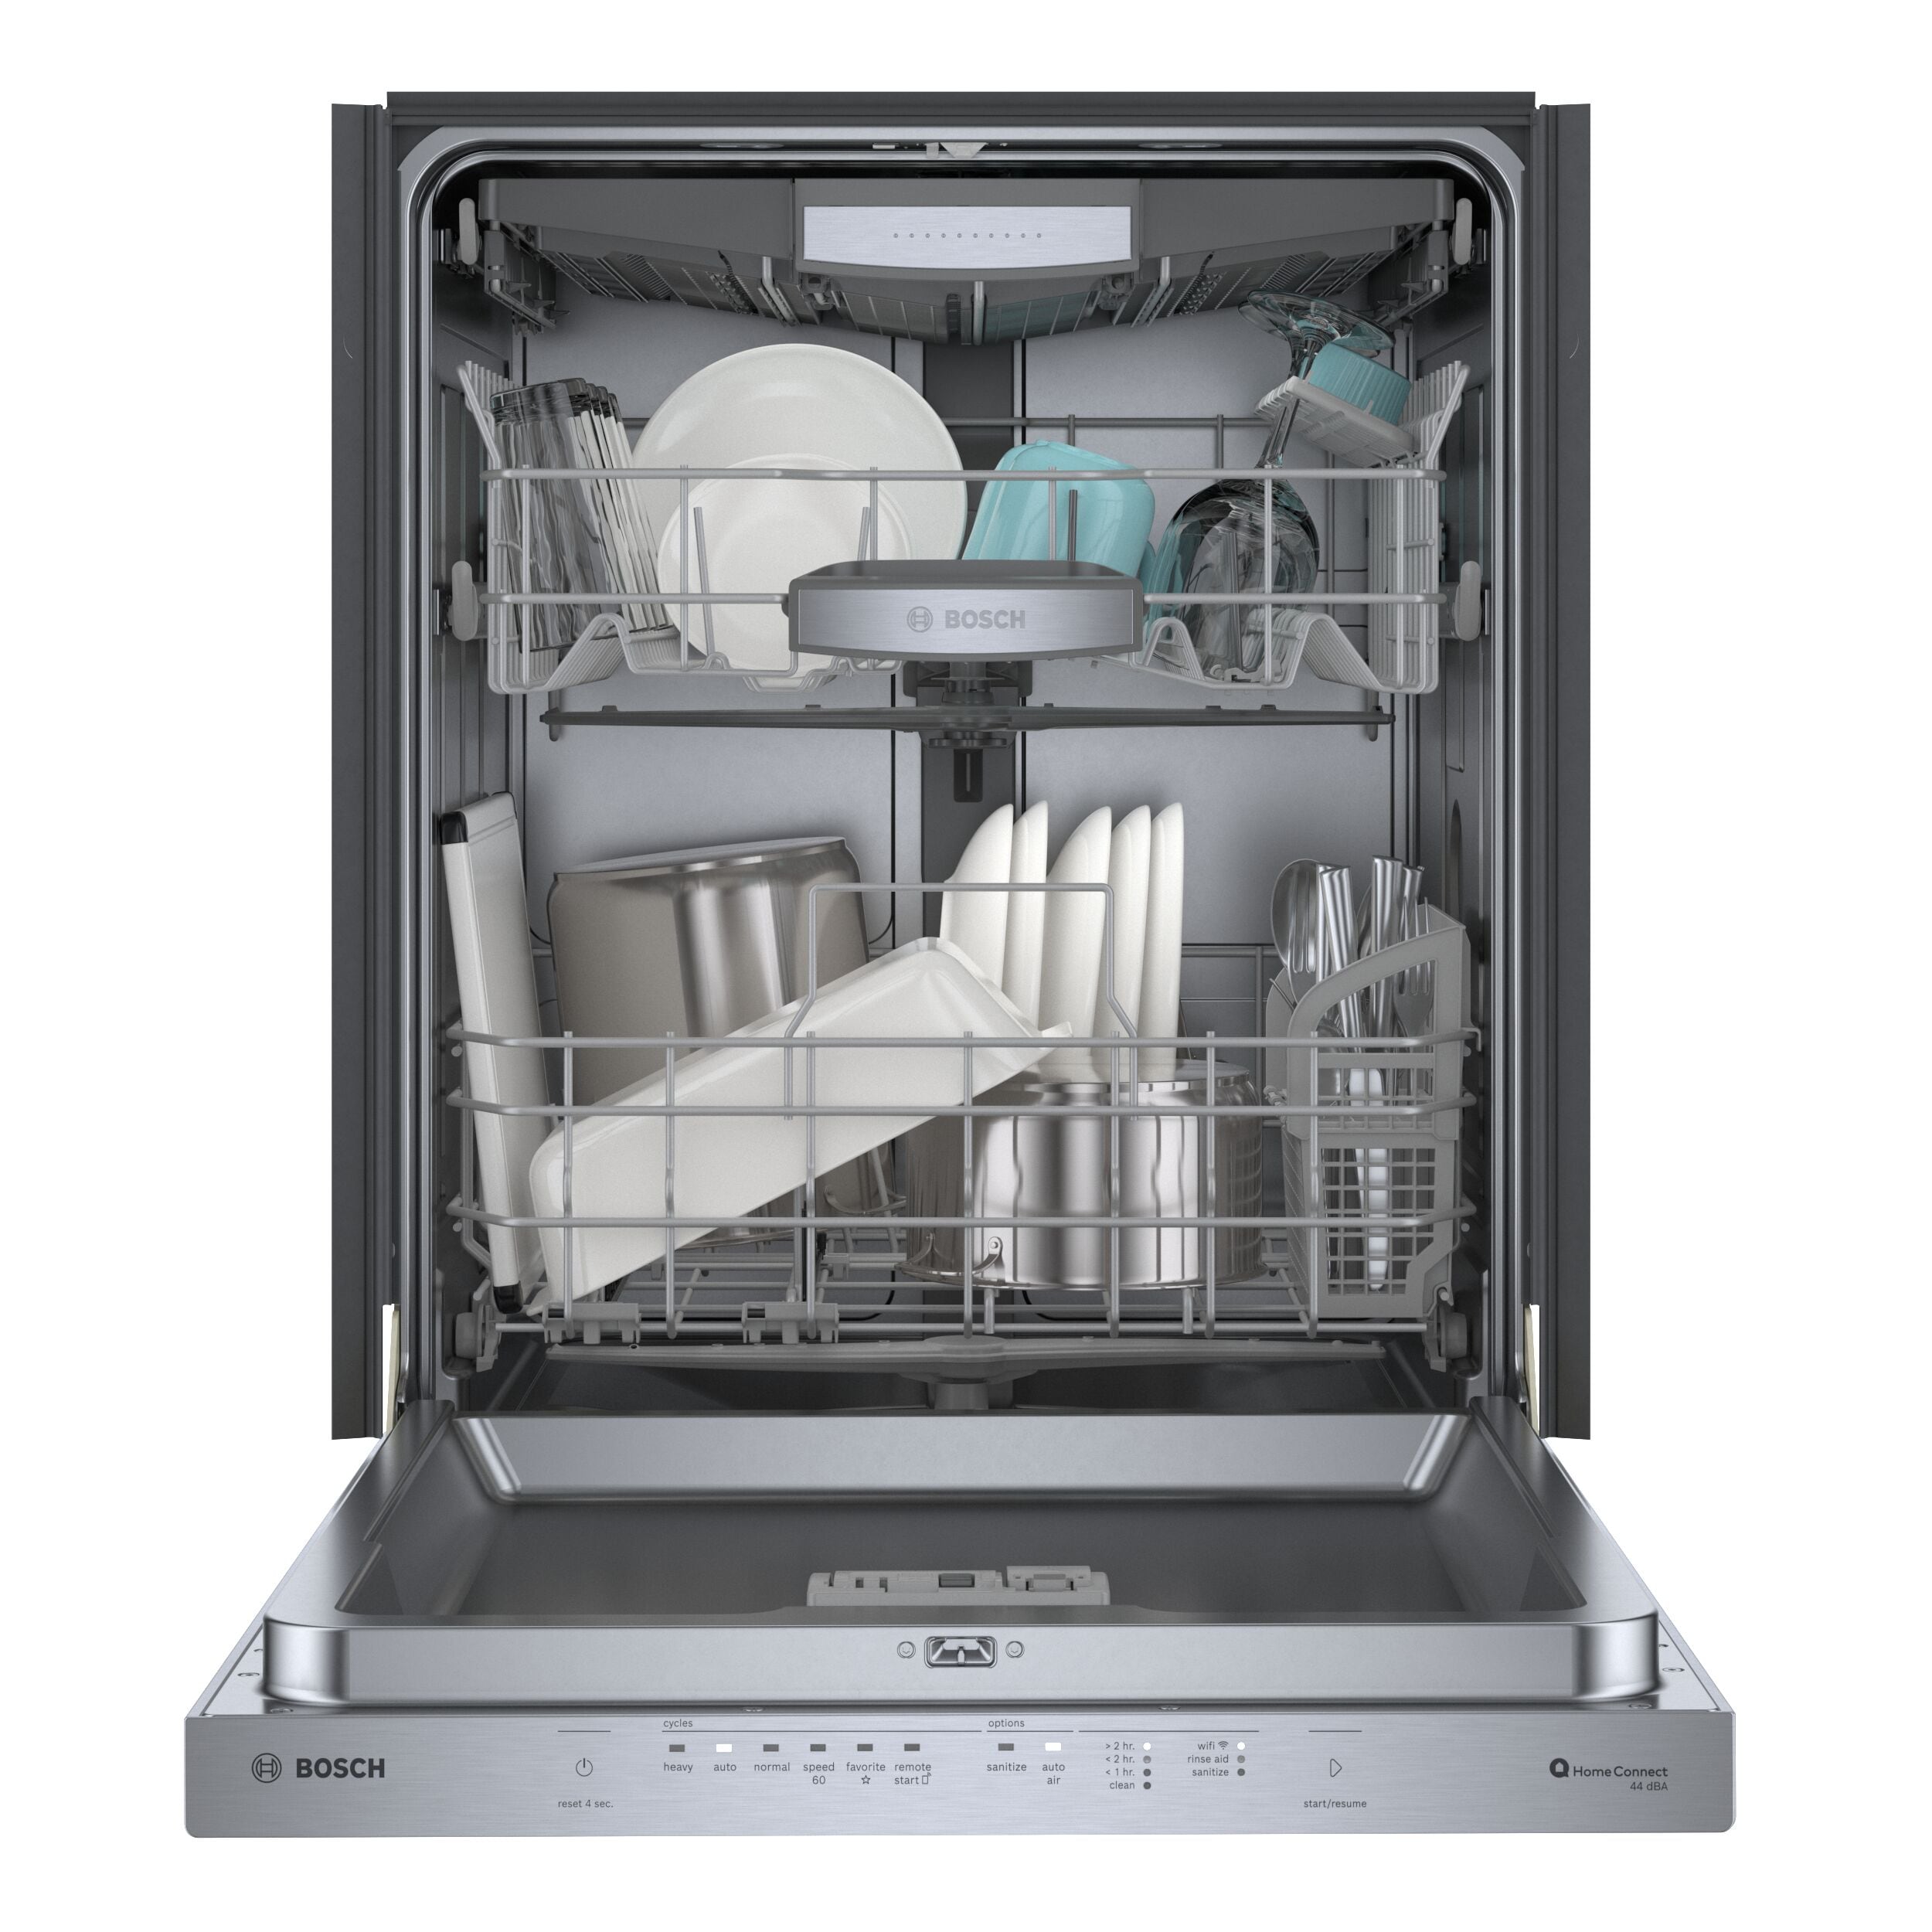 Bosch 500 Series Top Control in Third Built-In the at Rack department (Stainless 24-in Built-In Dishwasher Steel) ENERGY Smart With STAR, 44-dBA Dishwashers